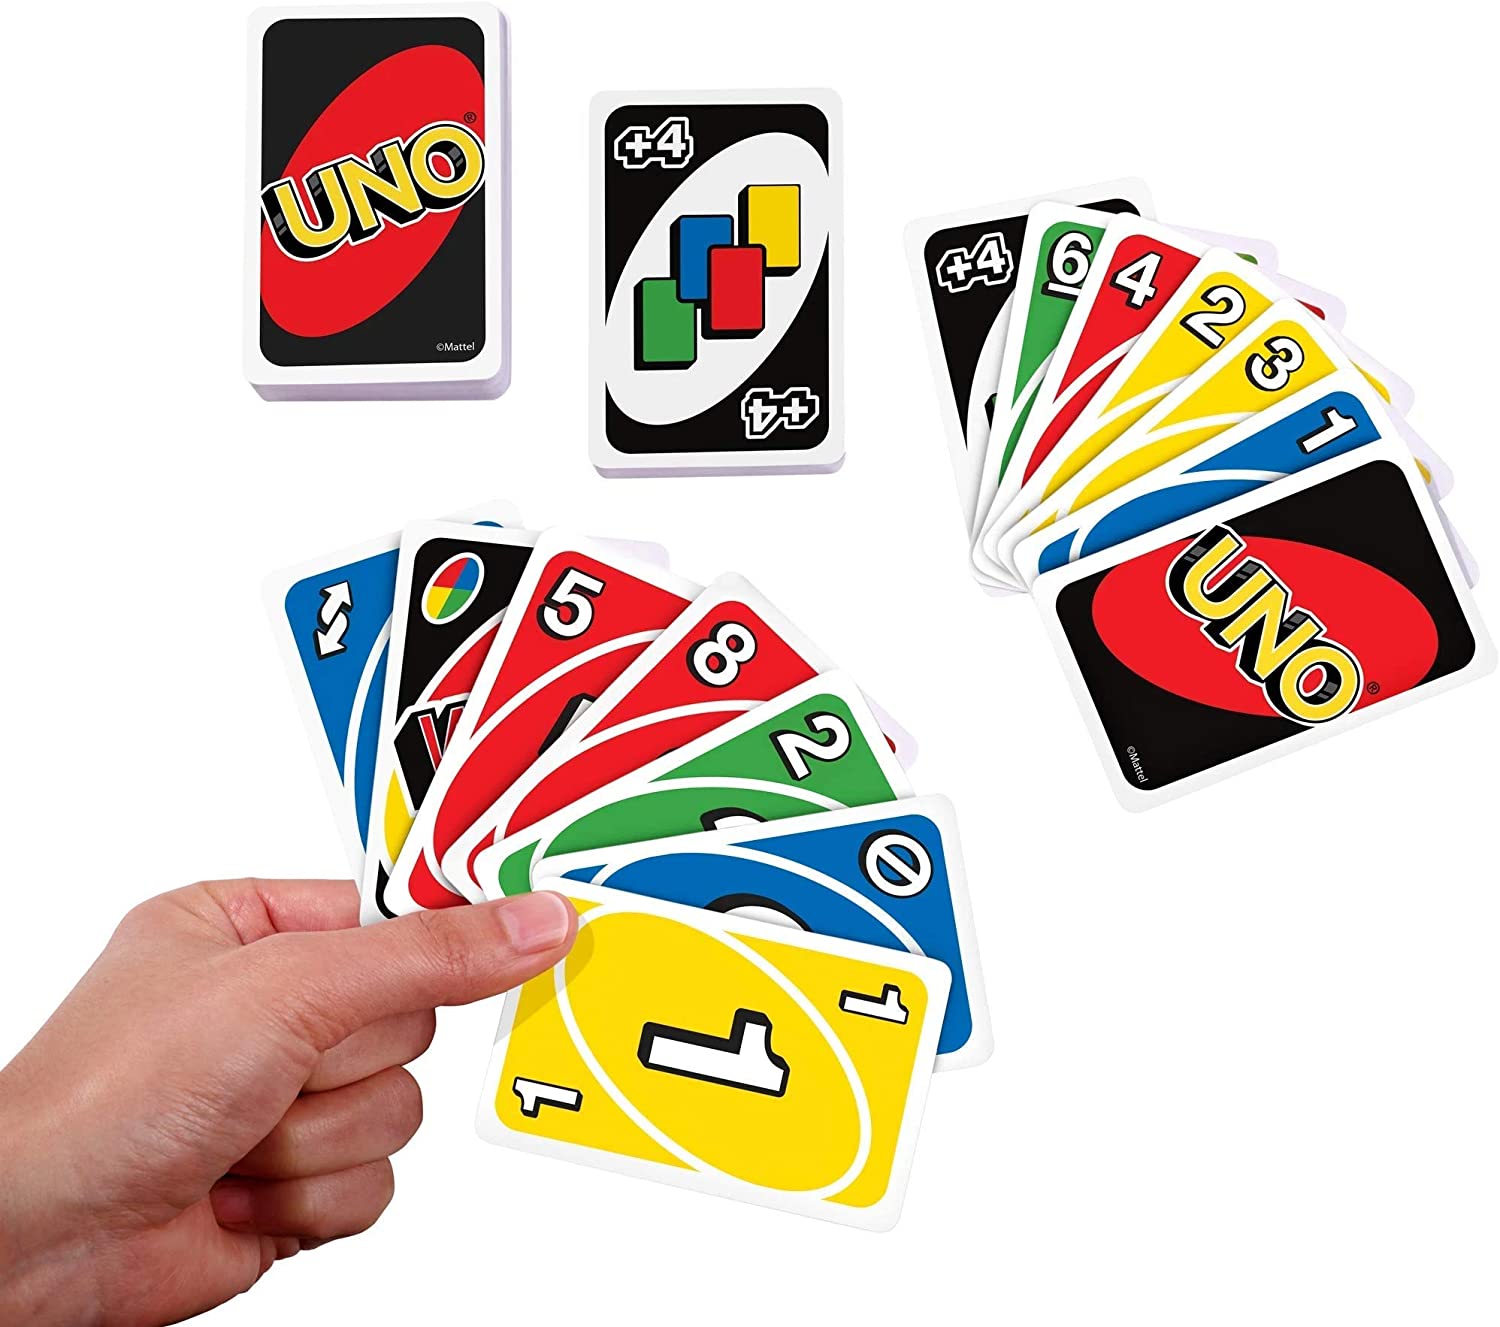 Pack of cards - Uno Card game for fun